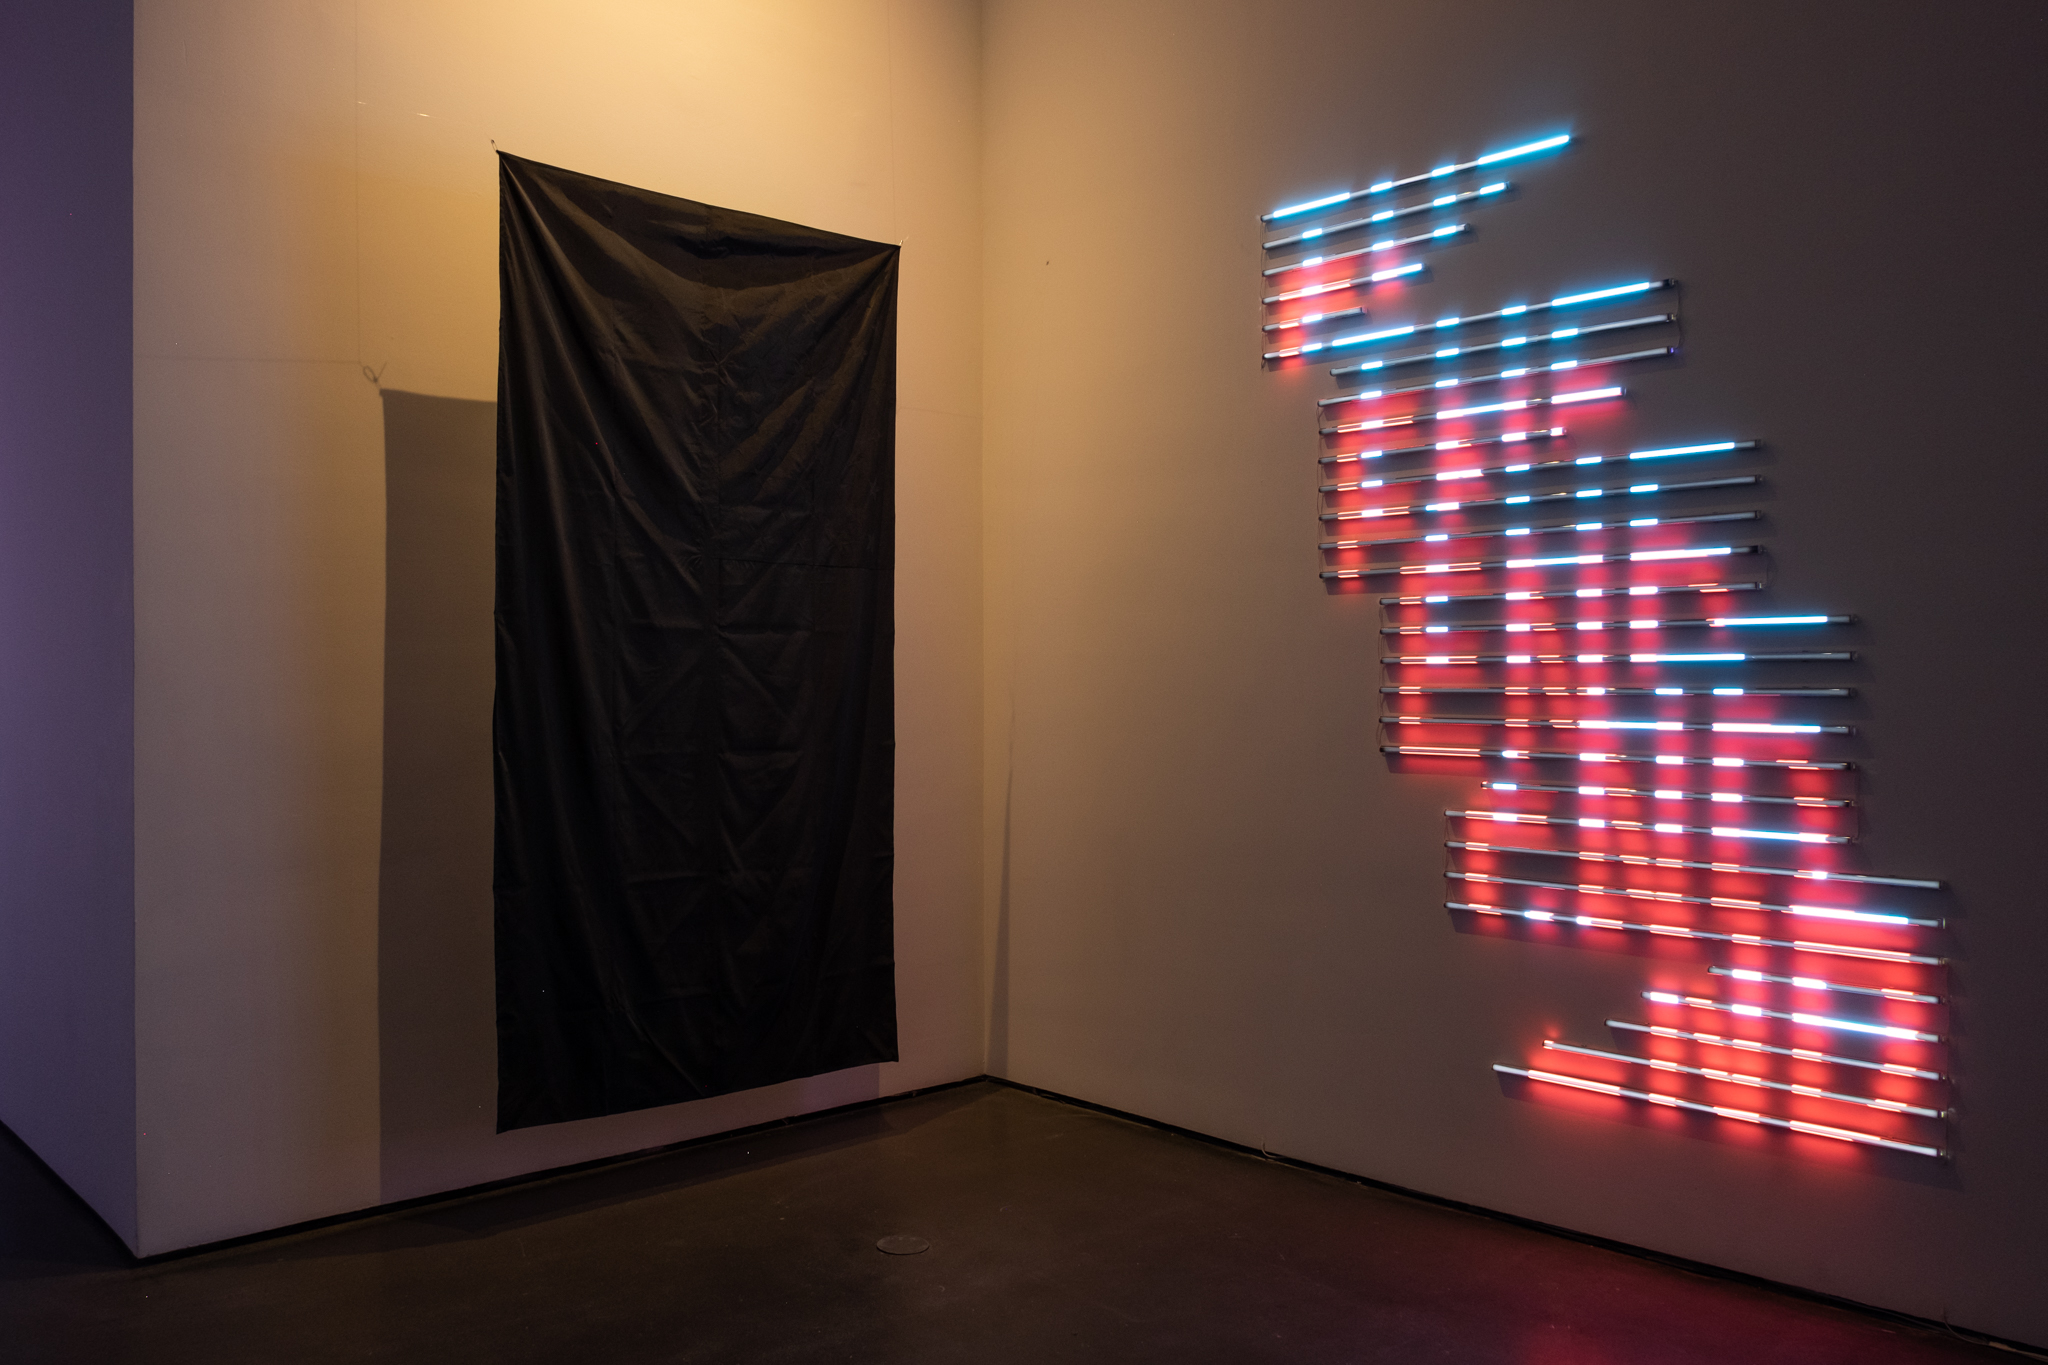 Filipino-American Artist James Clar collaborates with Hidilyn Diaz and Artists’ Parents for Silverlens Show in New York